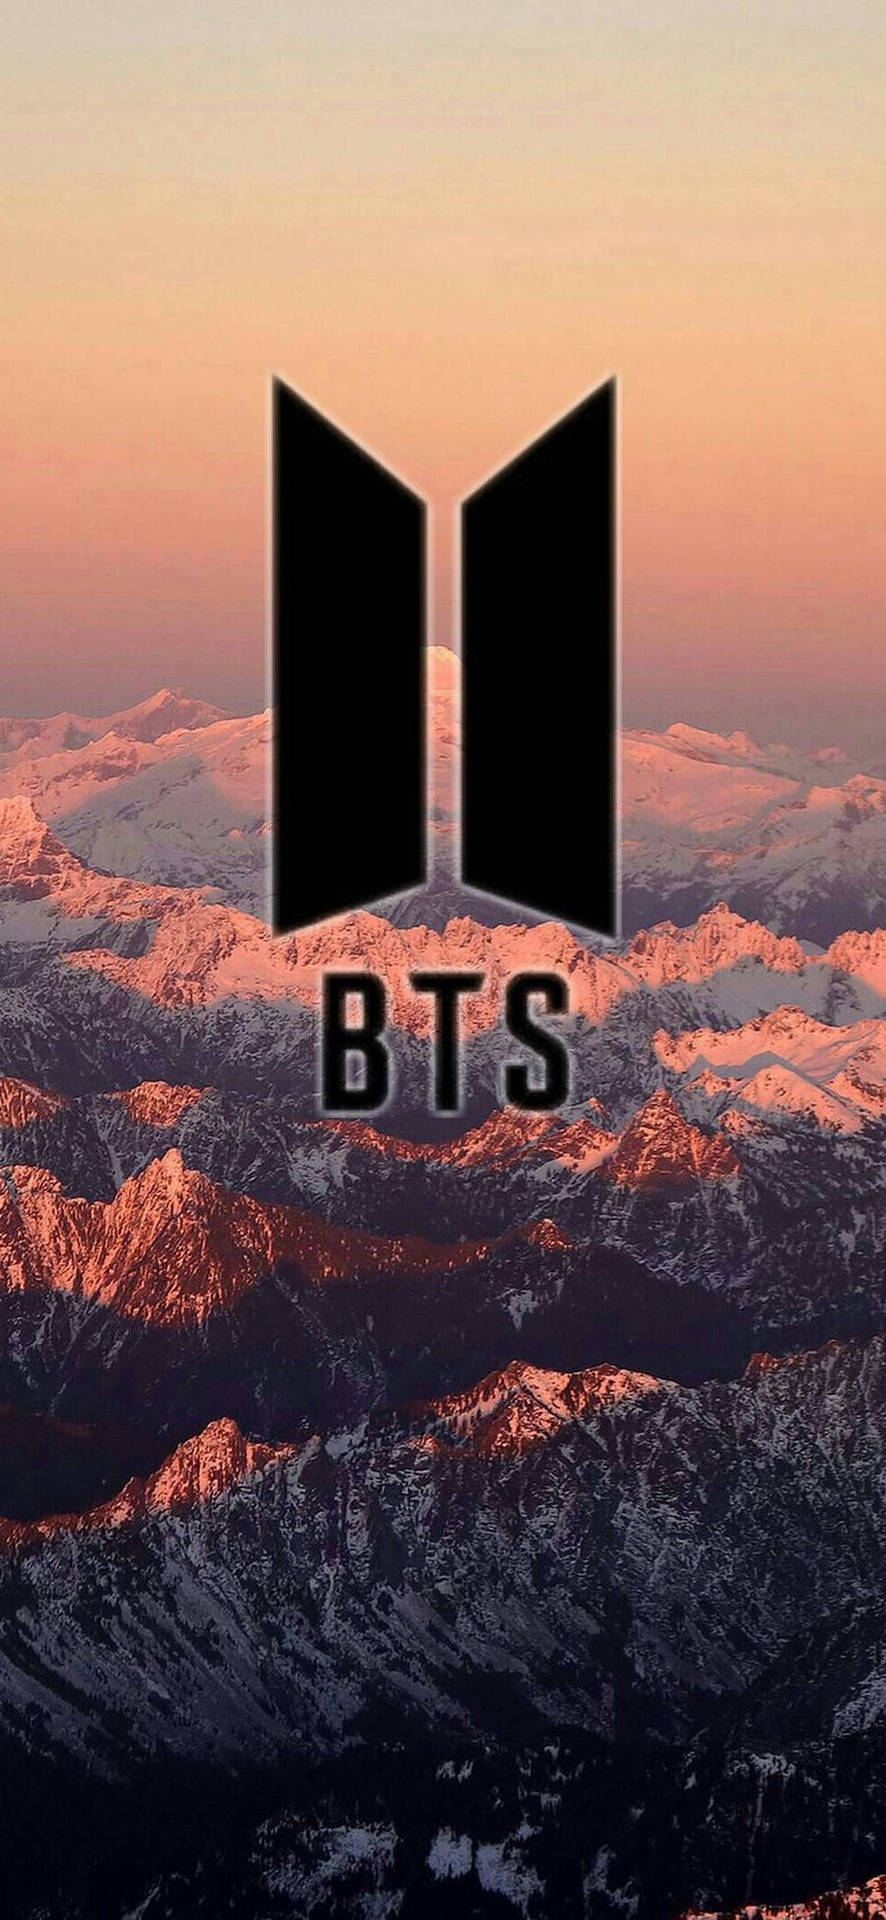 Bts Logo On Aesthetic Mountain Picture